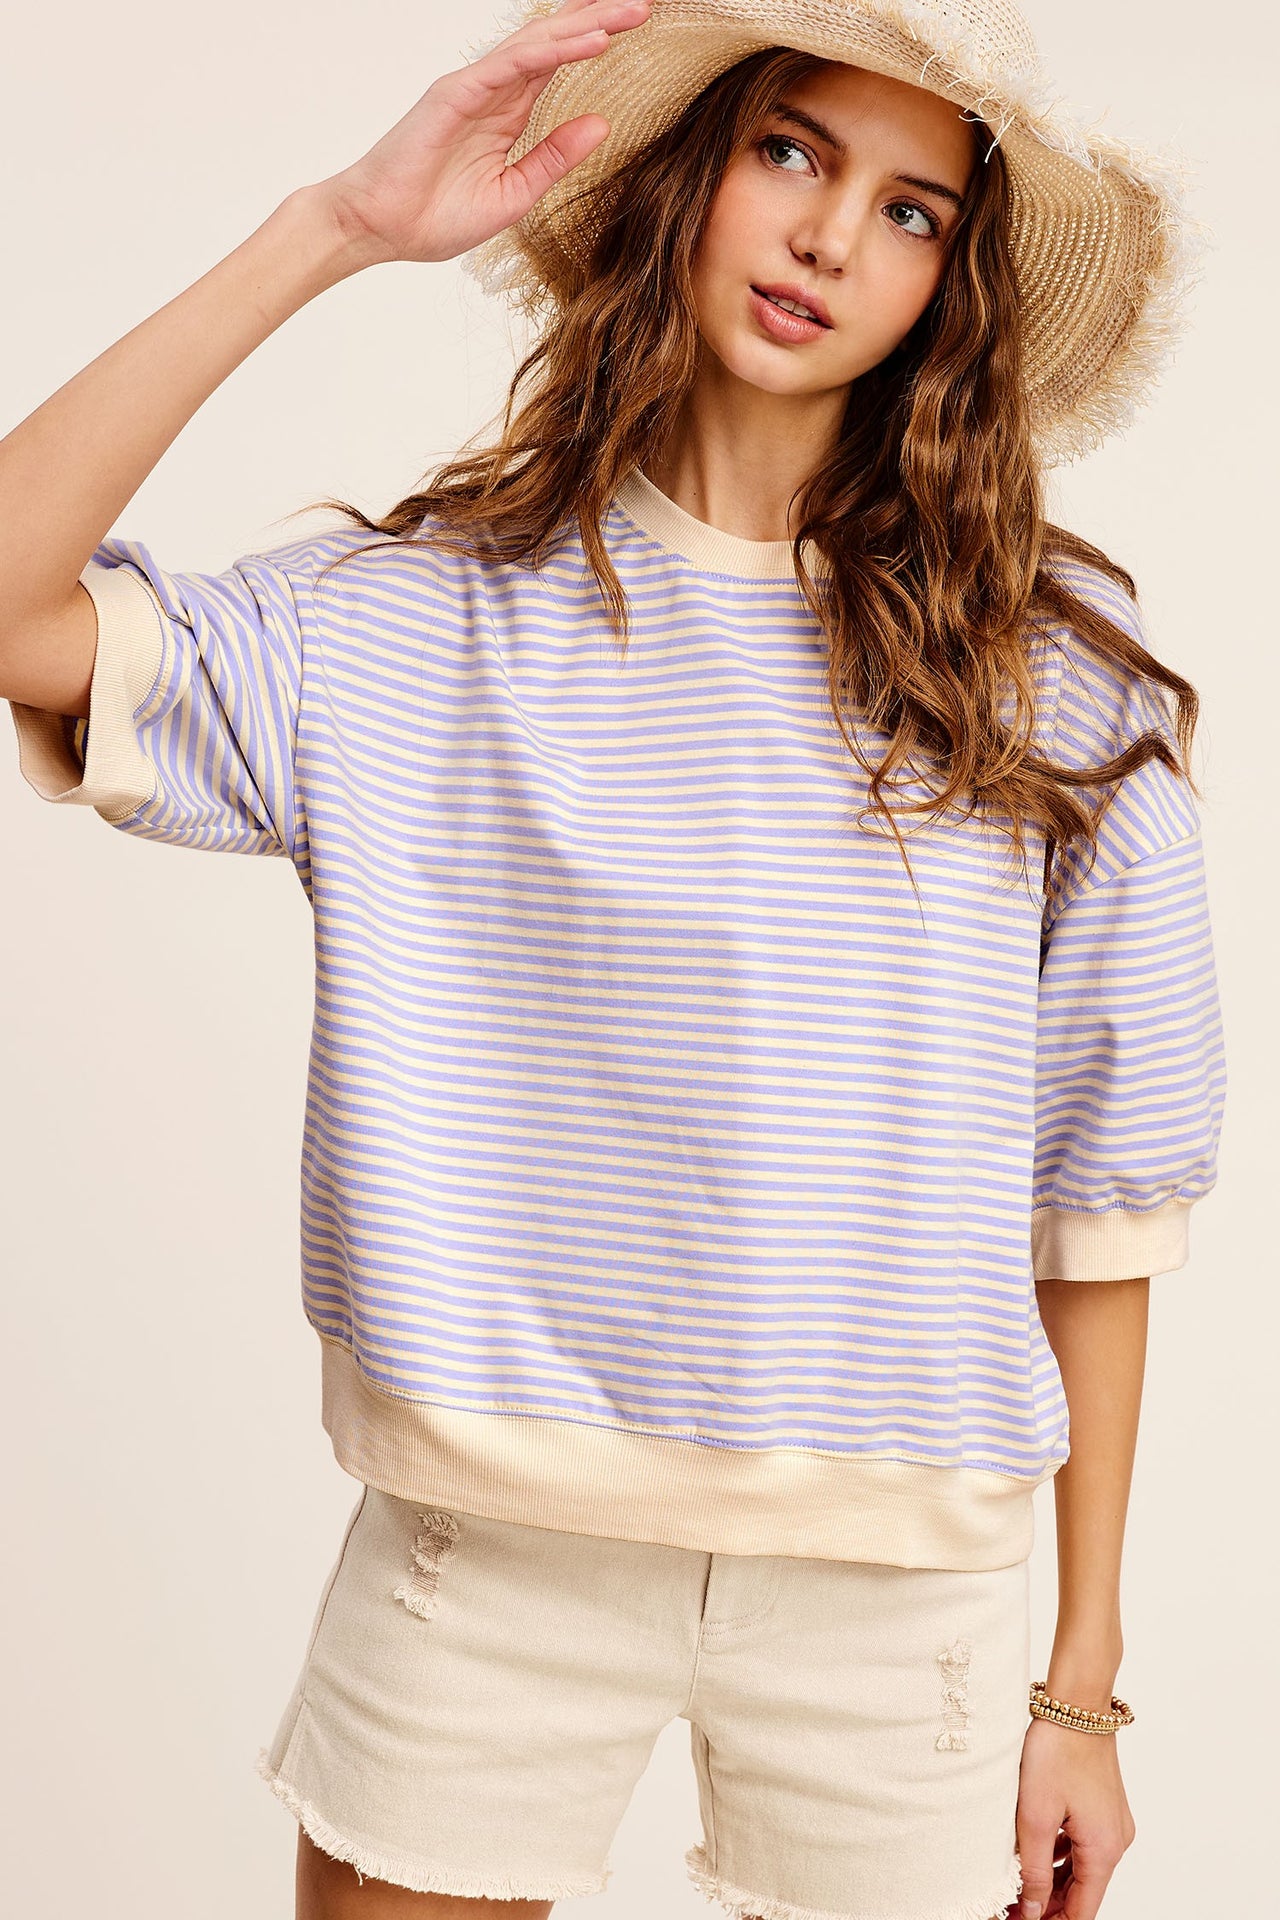 The Shelby Top